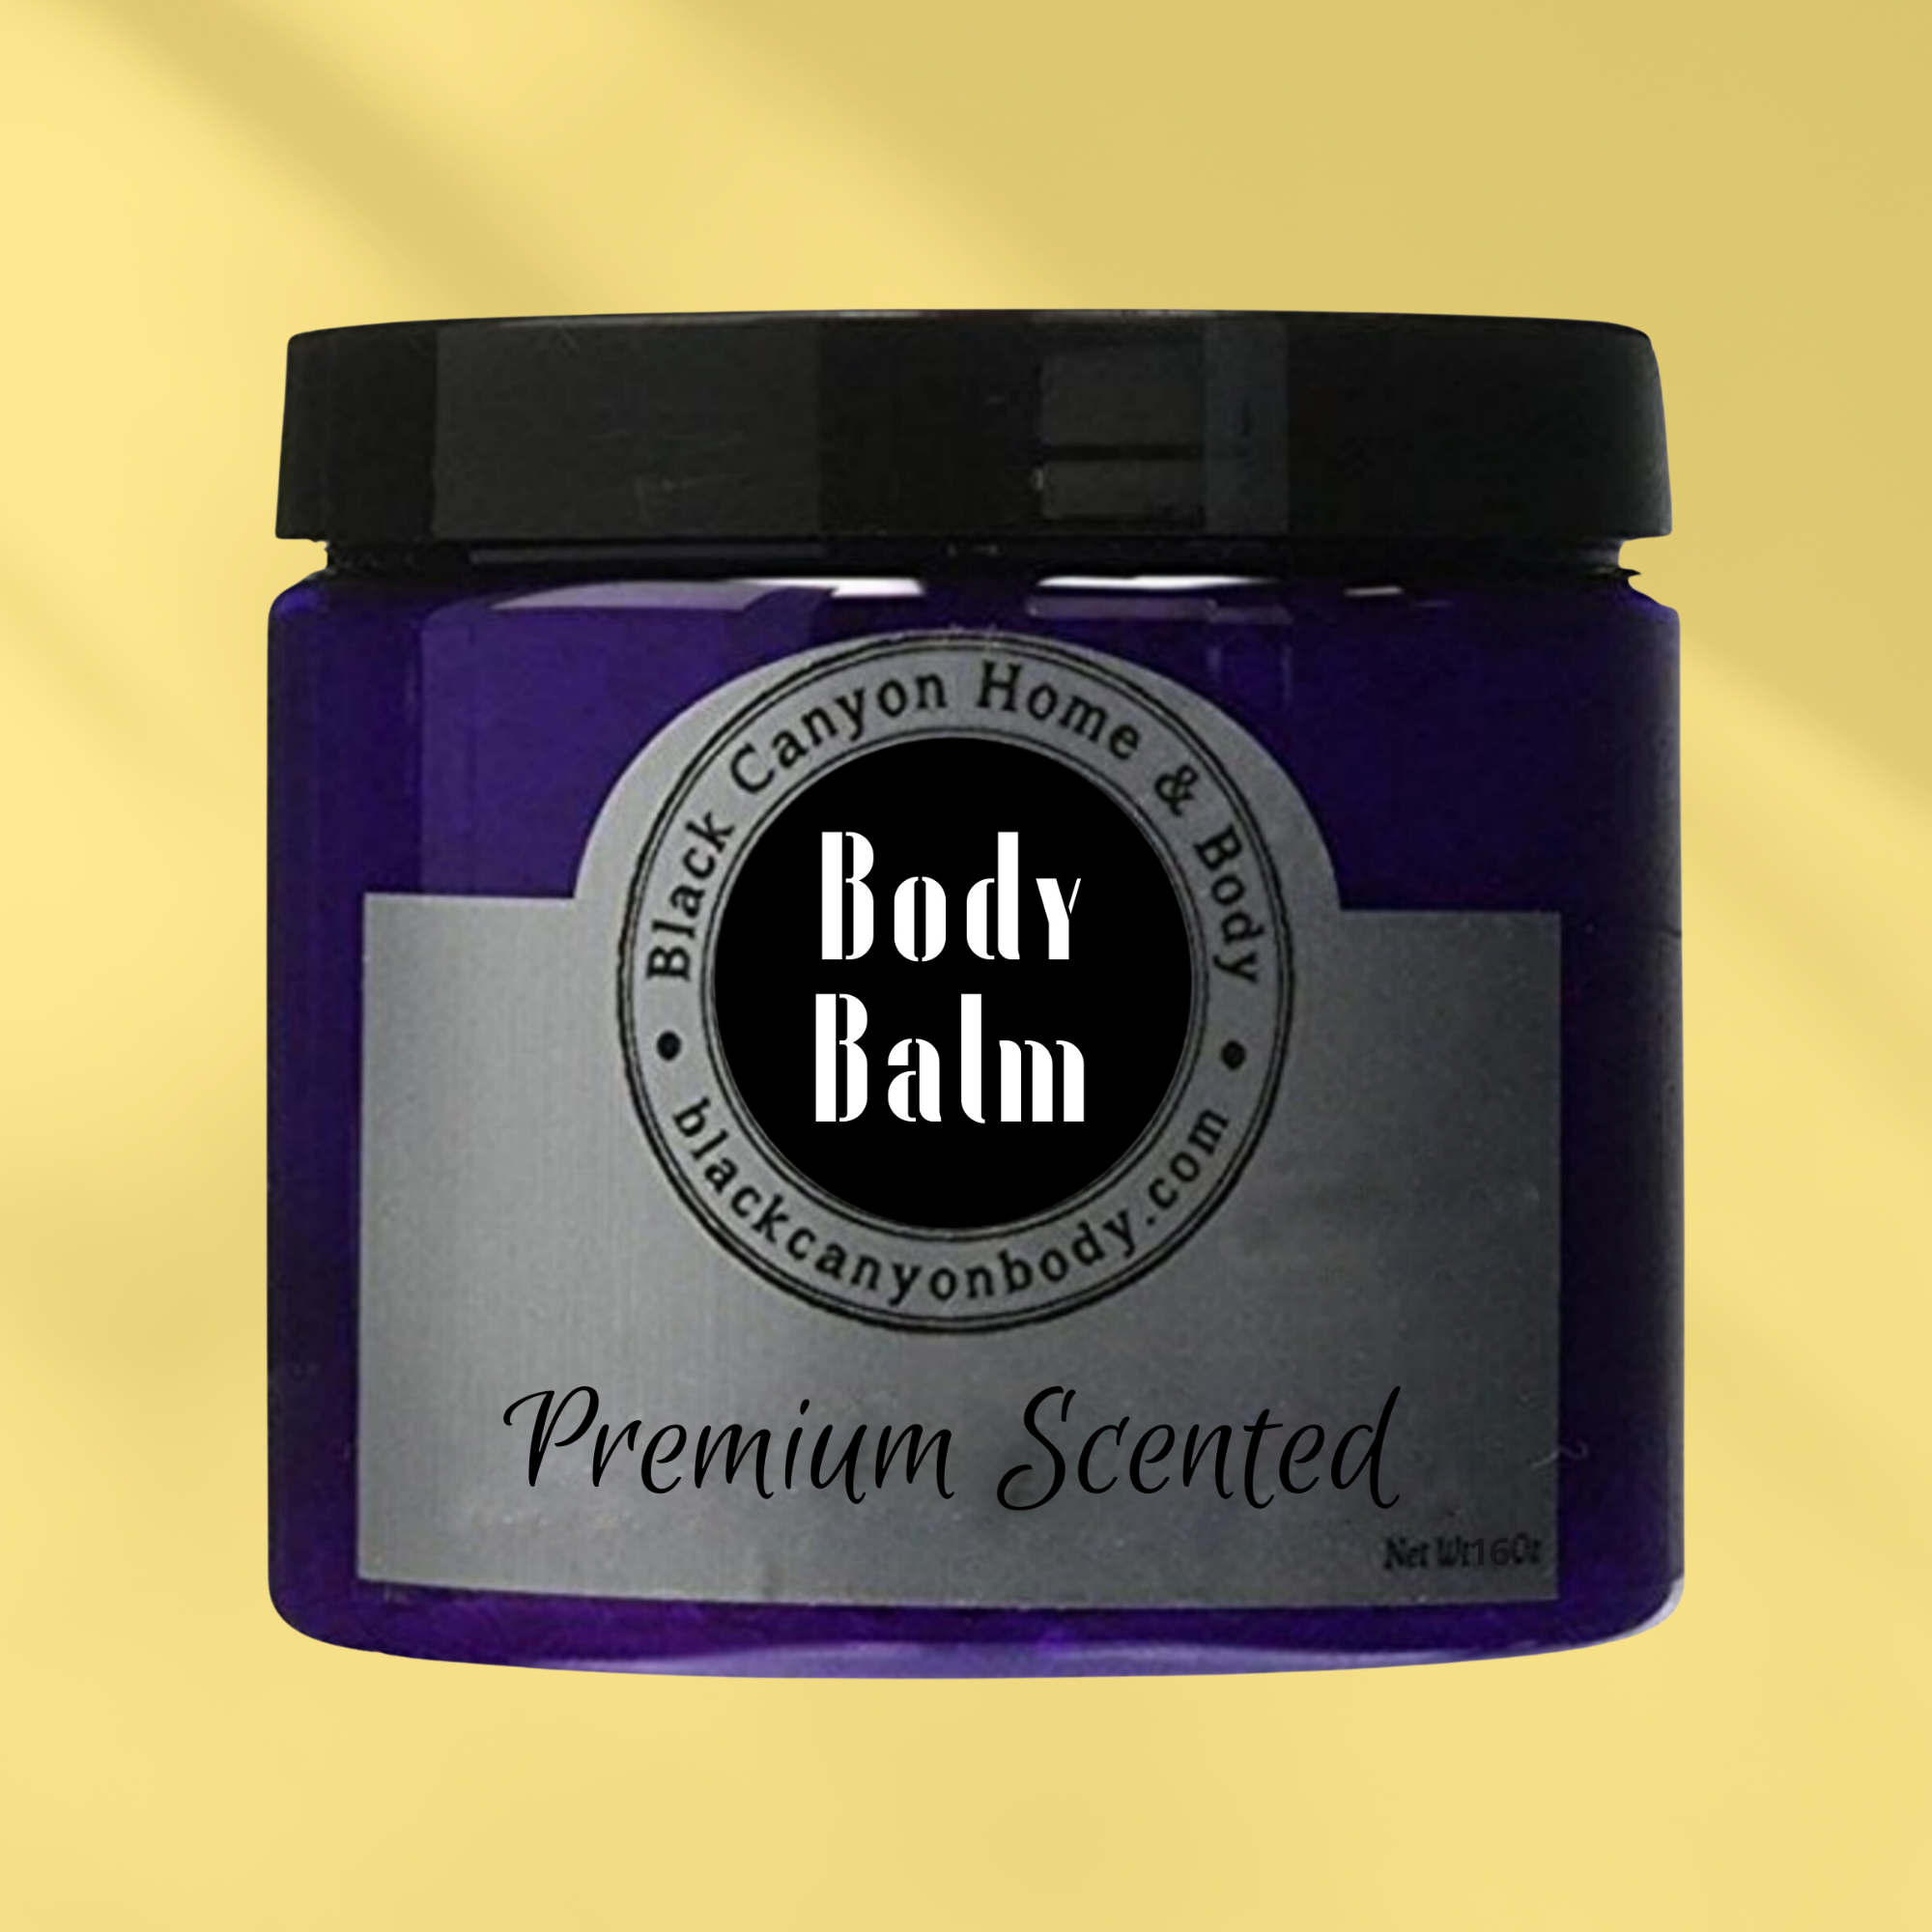 Black Canyon Bubblegum Scented Natural Body Balm with Shea